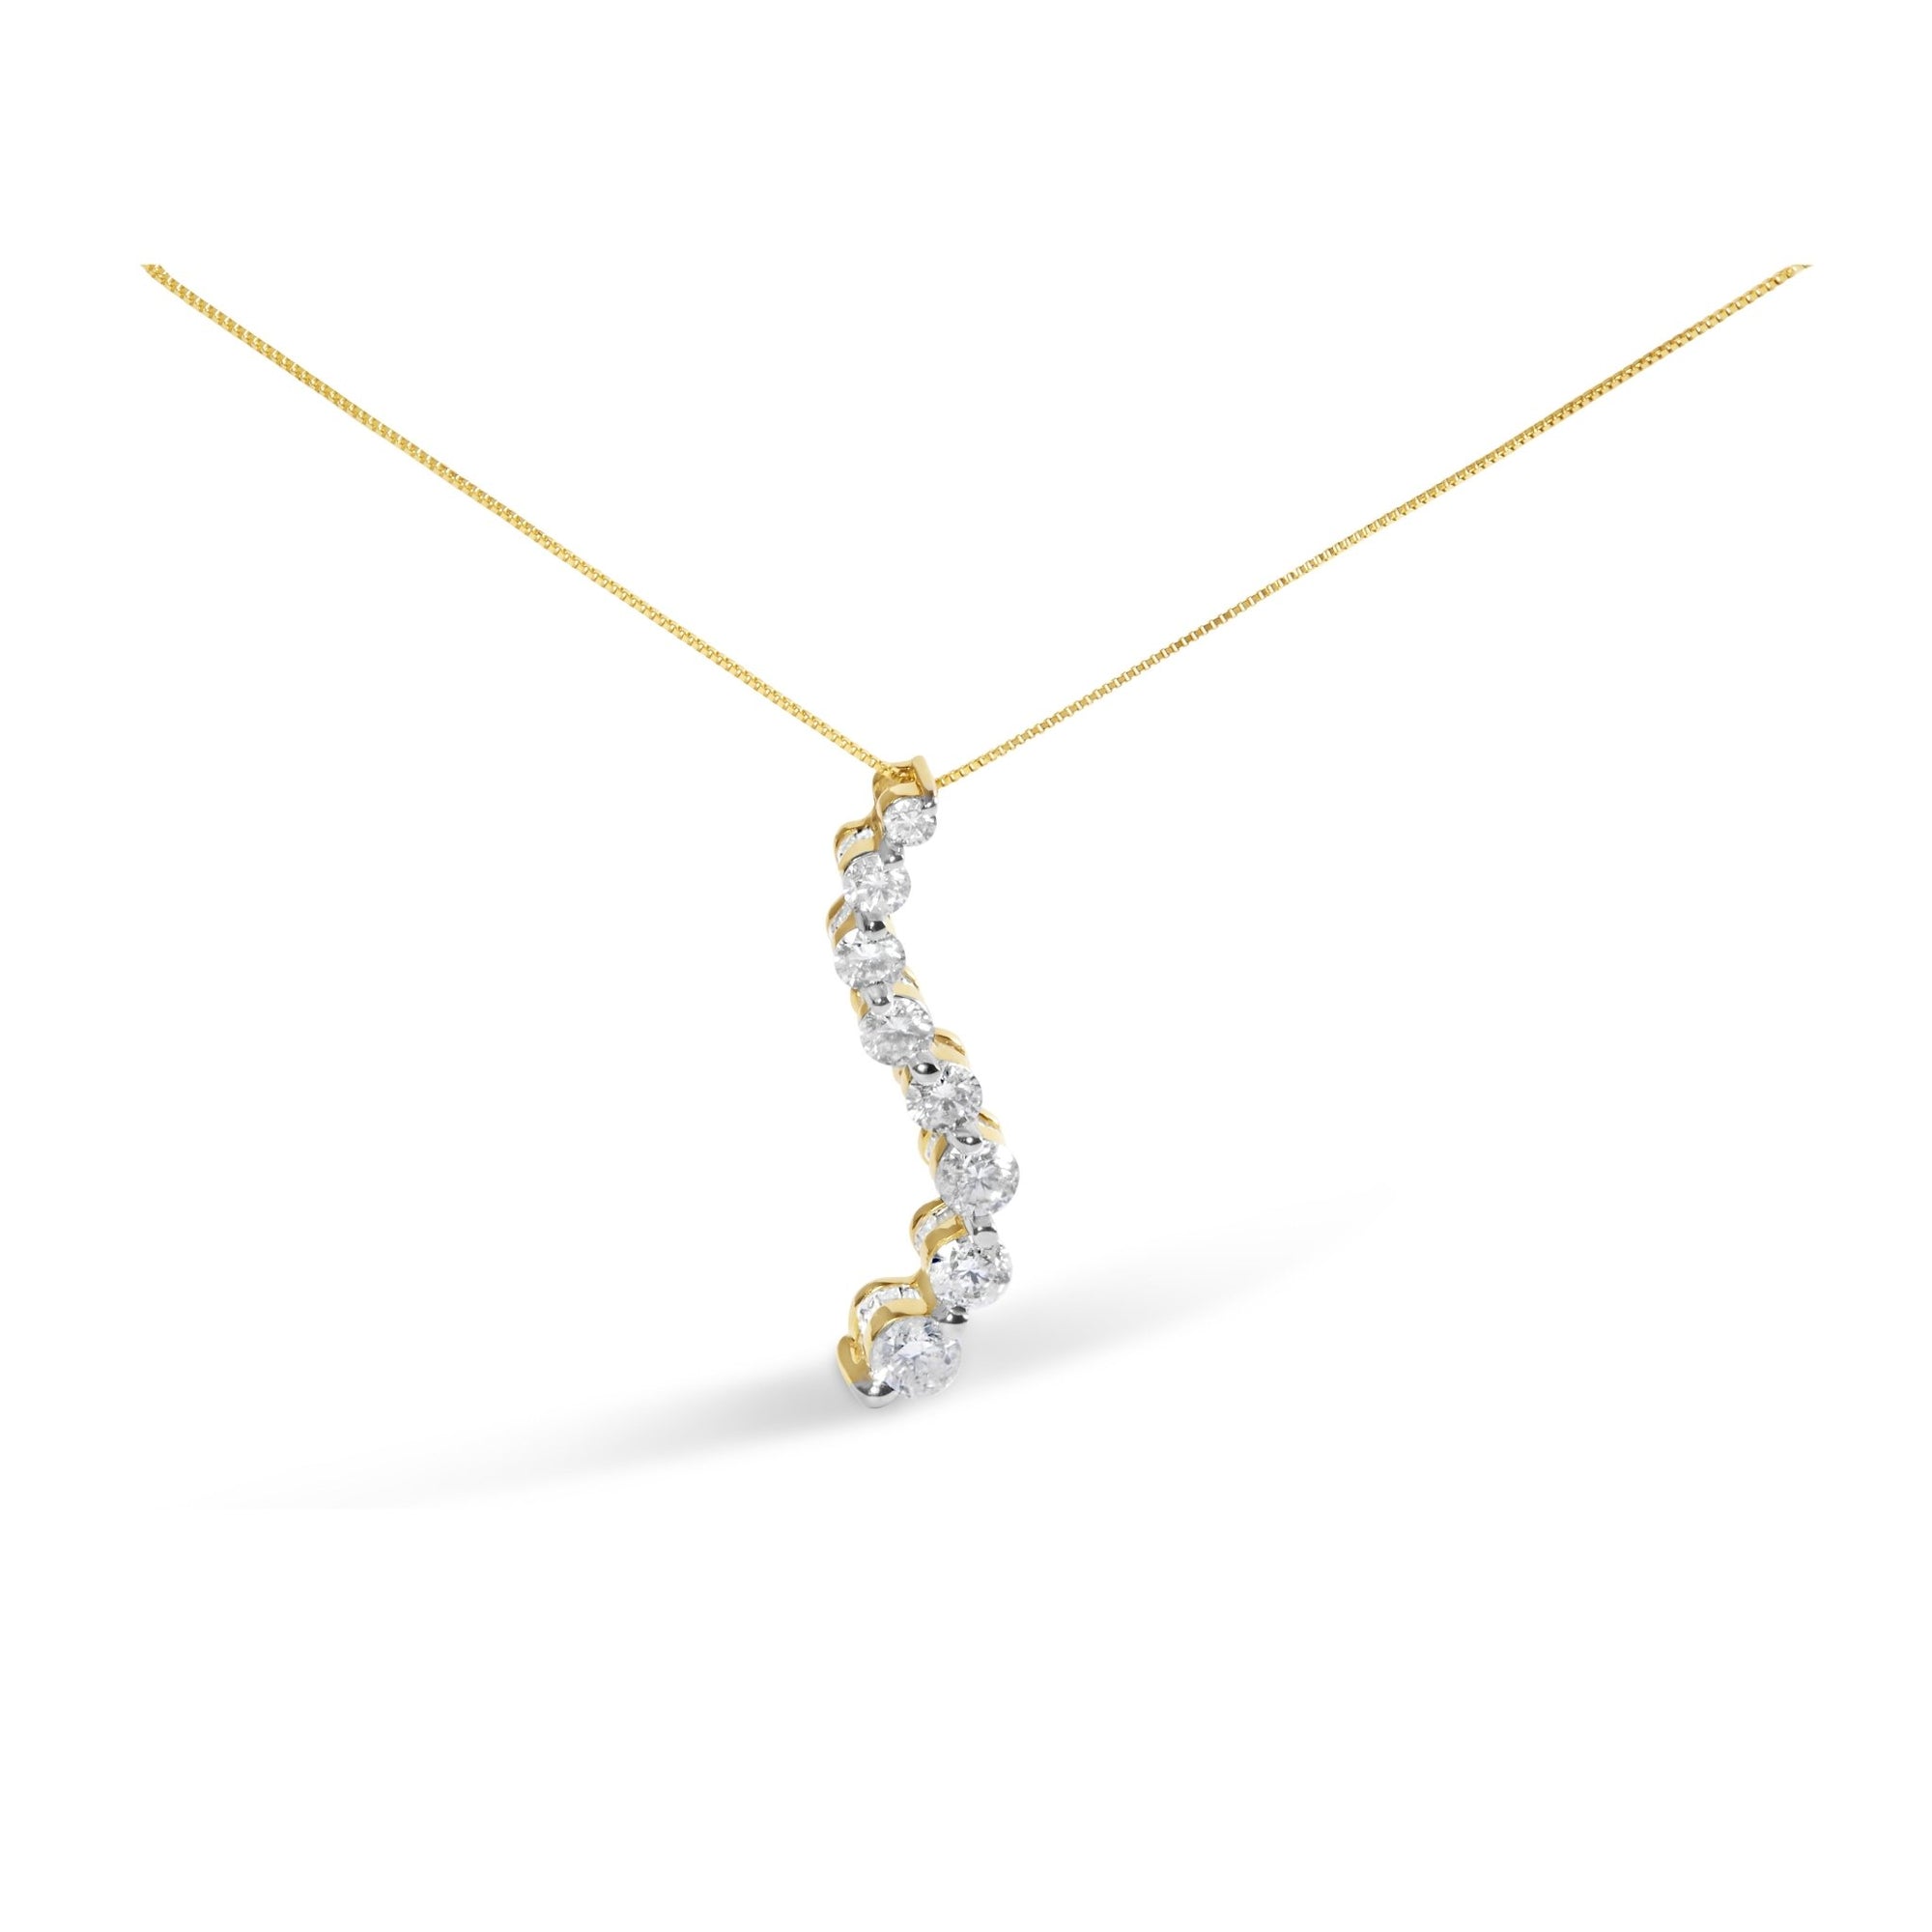 AGS Certified 14k Yellow Gold 3.0 Cttw Baguette and Brilliant Round-Cut Diamond Journey 18" Pendant Necklace (G-H Color, I1-I2 Clarity) - LinkagejewelrydesignLinkagejewelrydesign